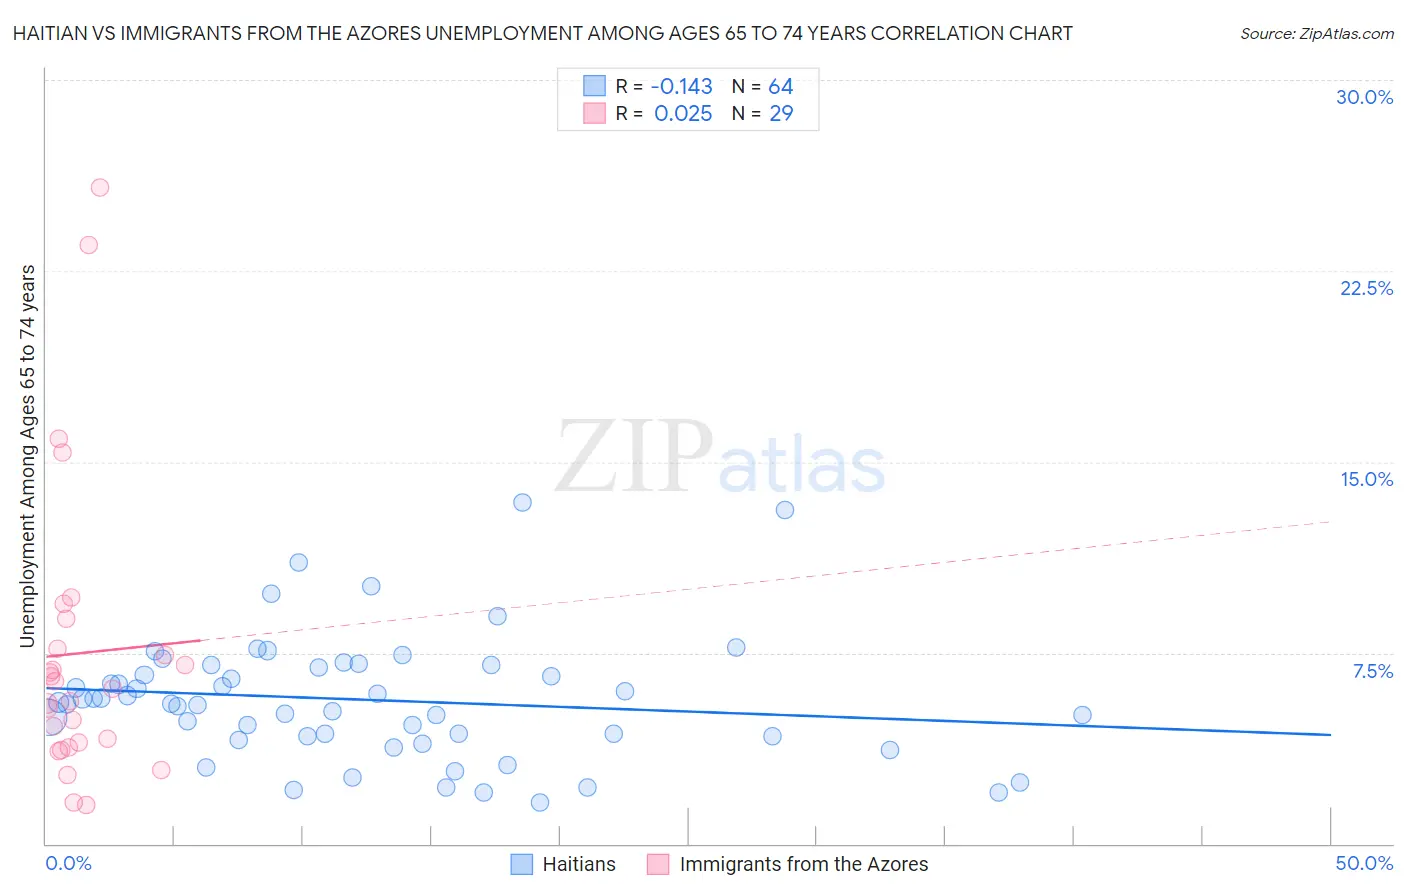 Haitian vs Immigrants from the Azores Unemployment Among Ages 65 to 74 years